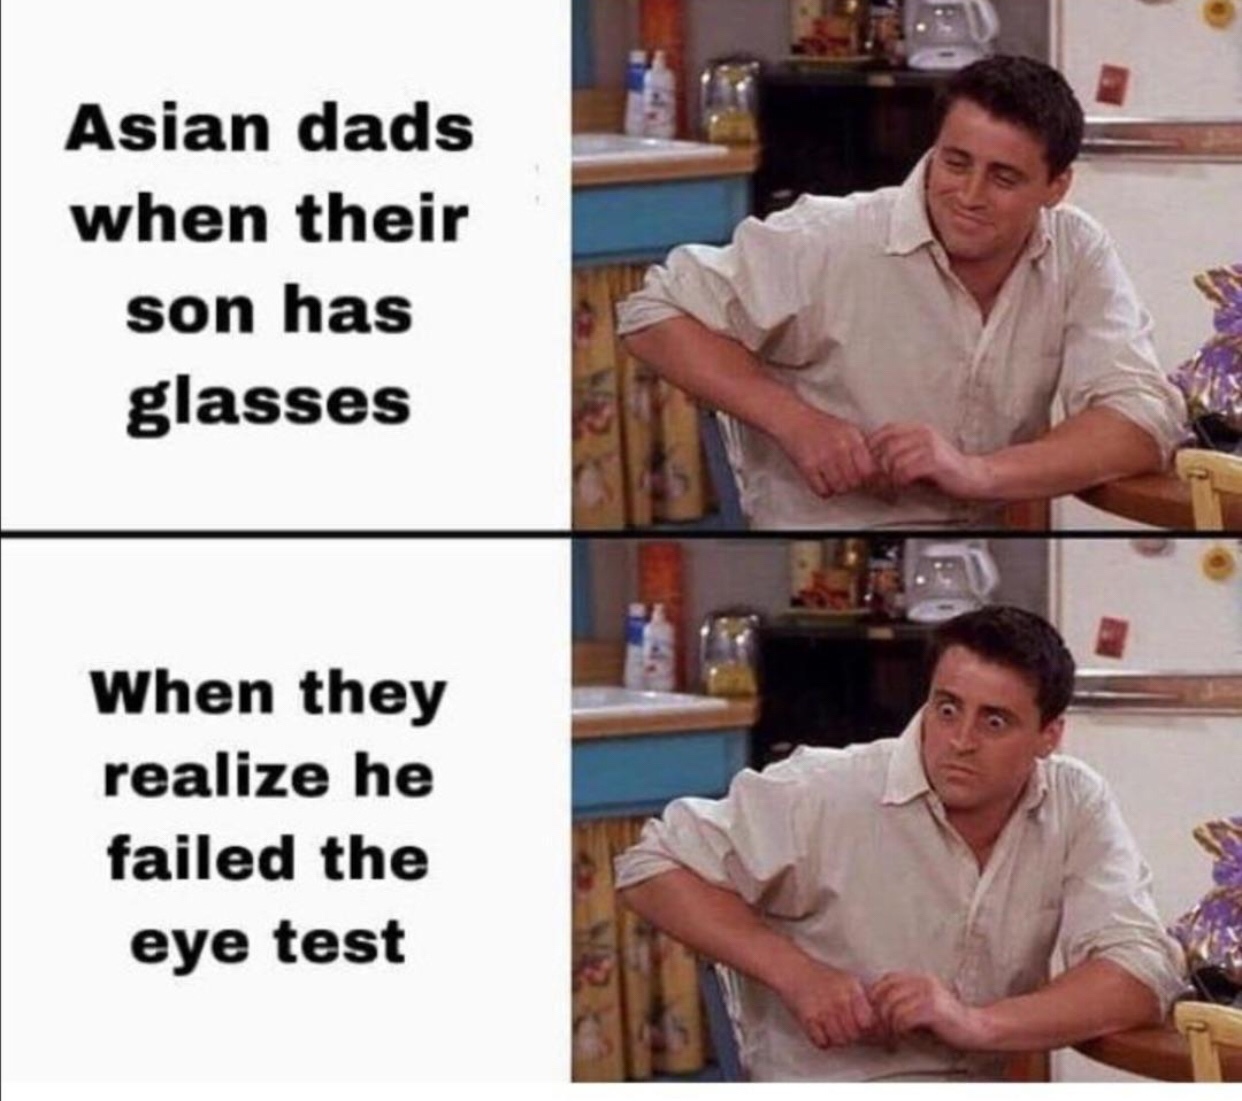 Asian Dads be like: “You’re a disappointment, you failed the test” - meme